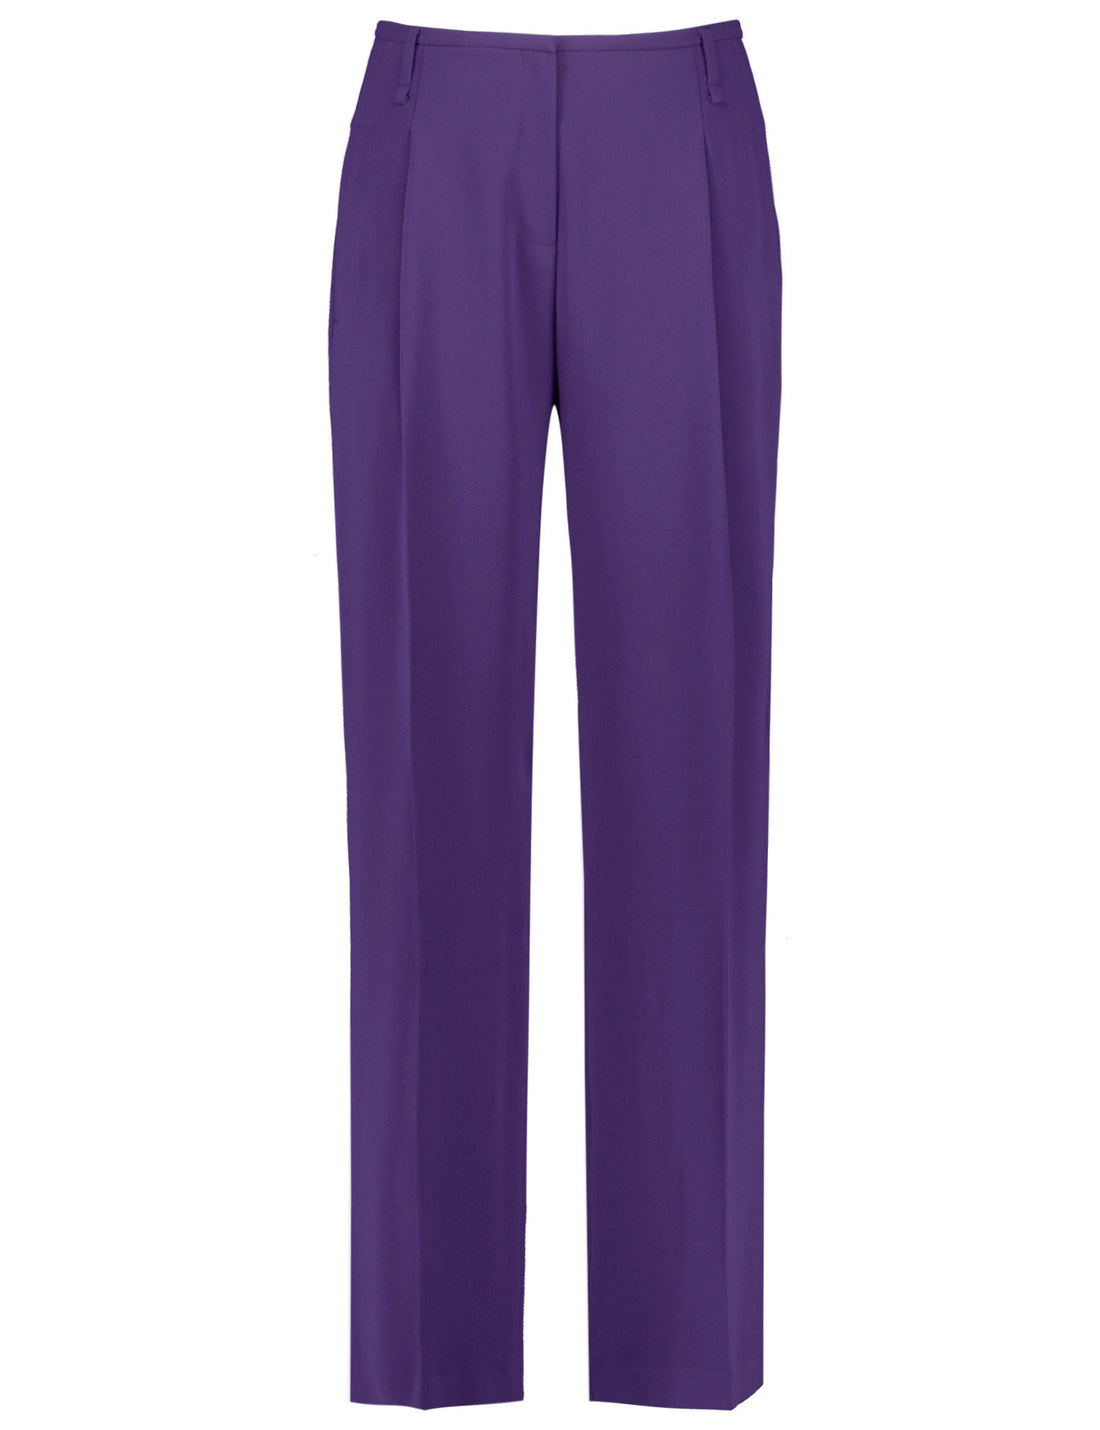 Flowing Trousers With Waist Pleats And A Wide Leg_220045-71944_30909_02